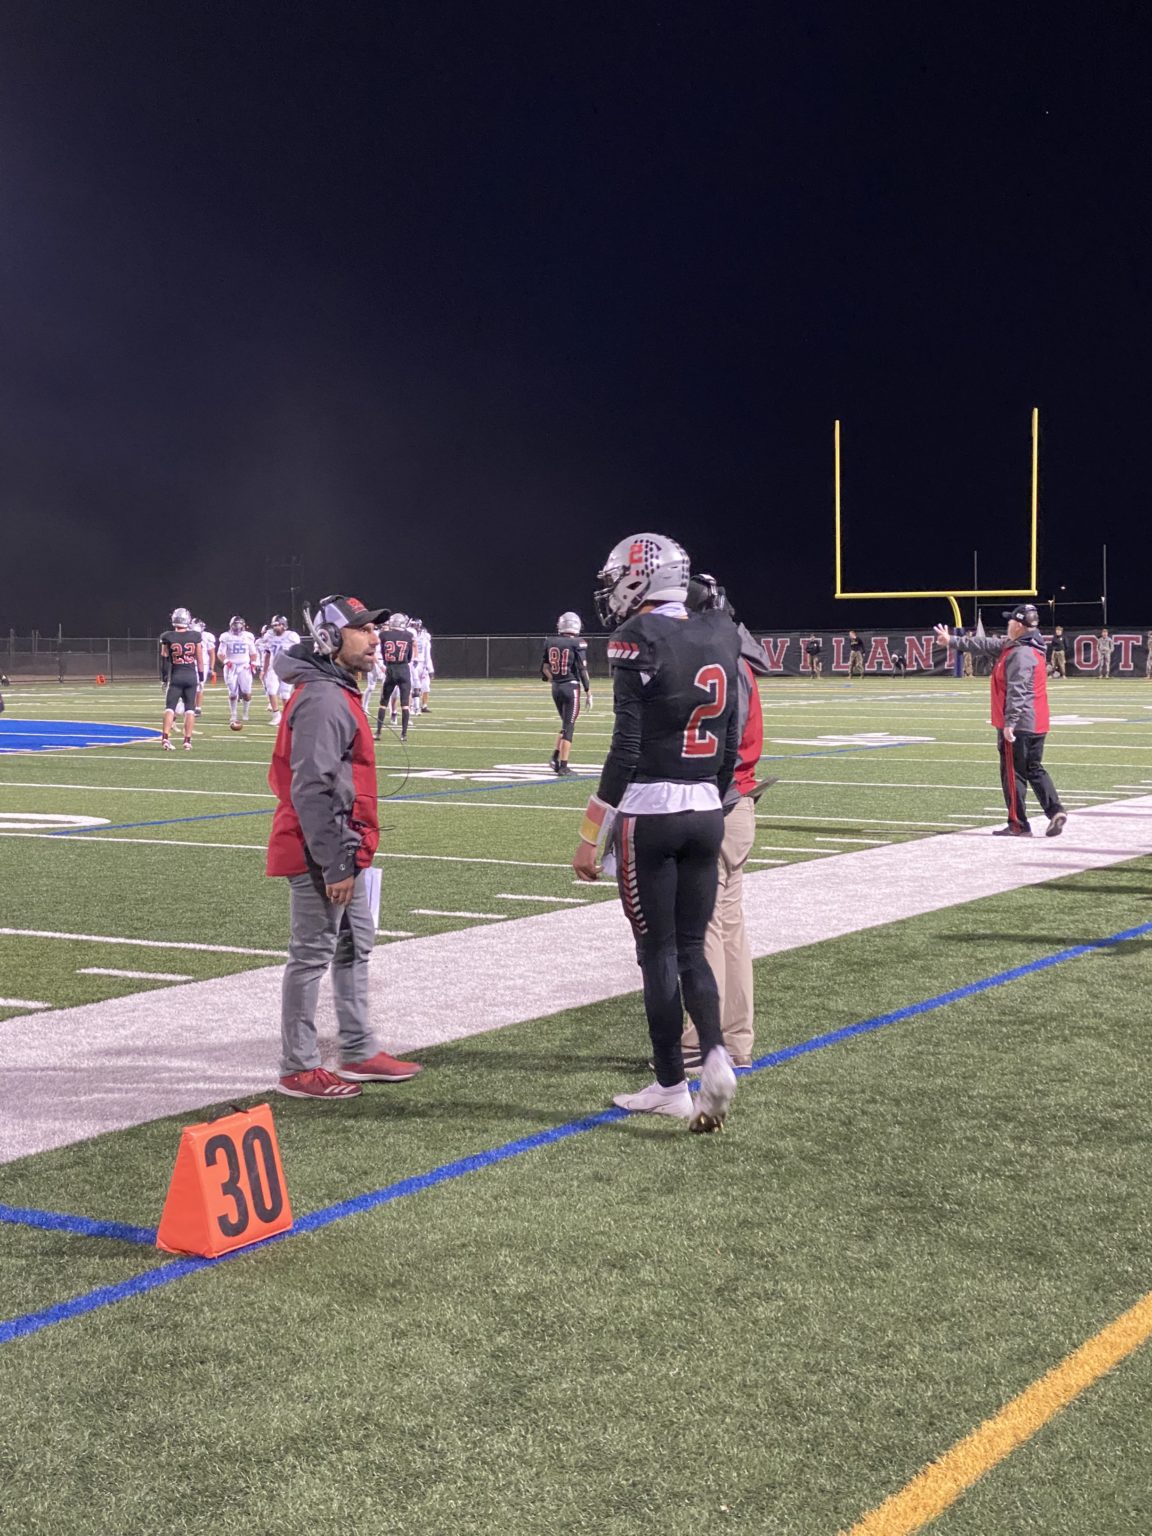 Loveland High School Stays Alive With Their First Playoff Win of 2021